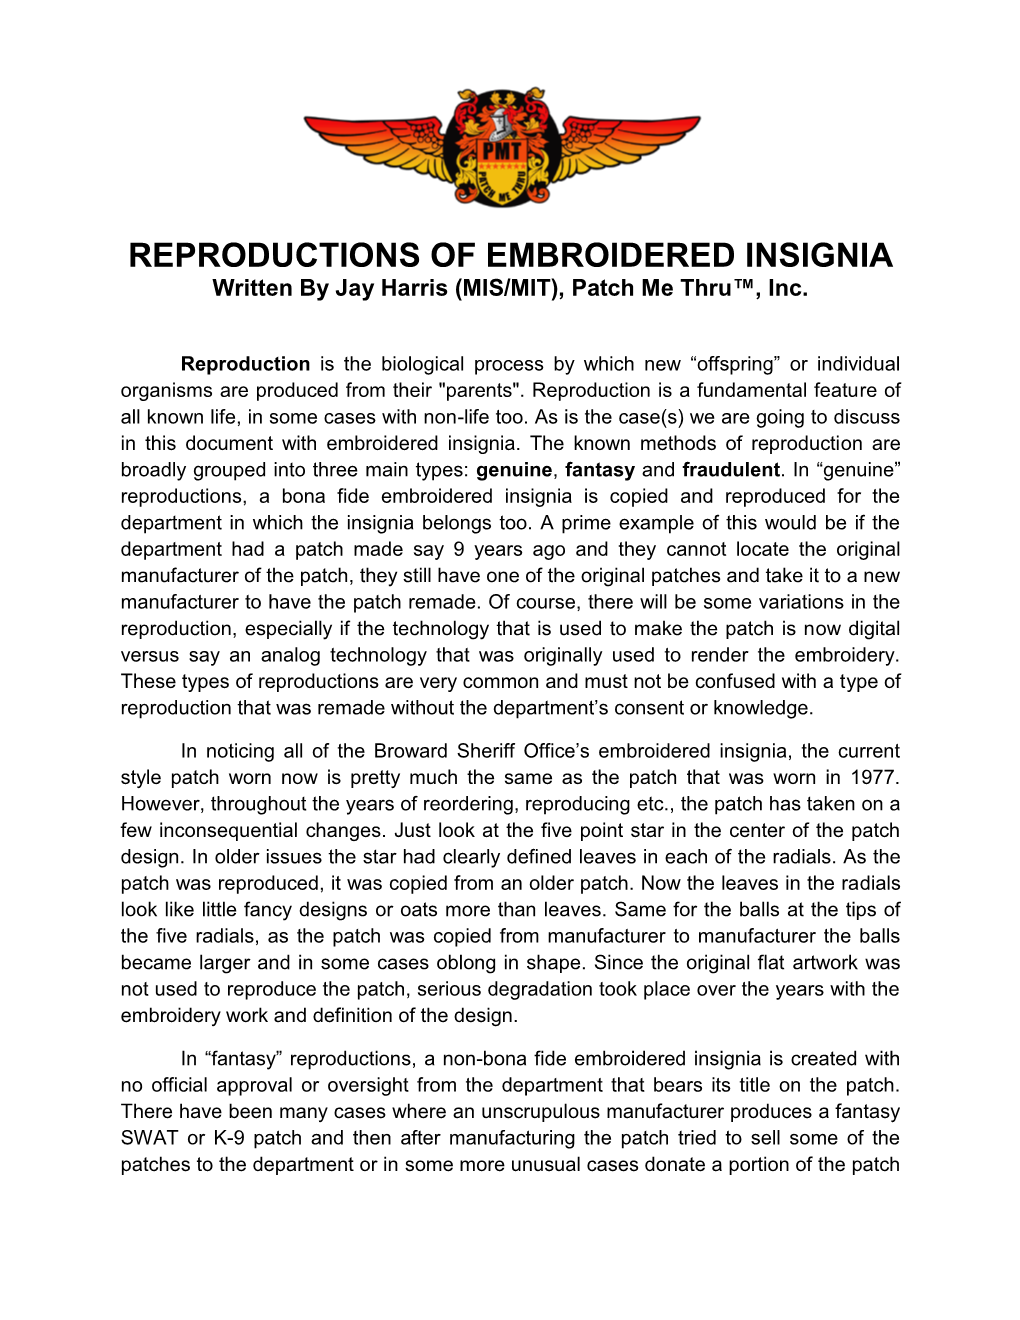 REPRODUCTIONS of EMBROIDERED INSIGNIA Written by Jay Harris (MIS/MIT), Patch Me Thru™, Inc